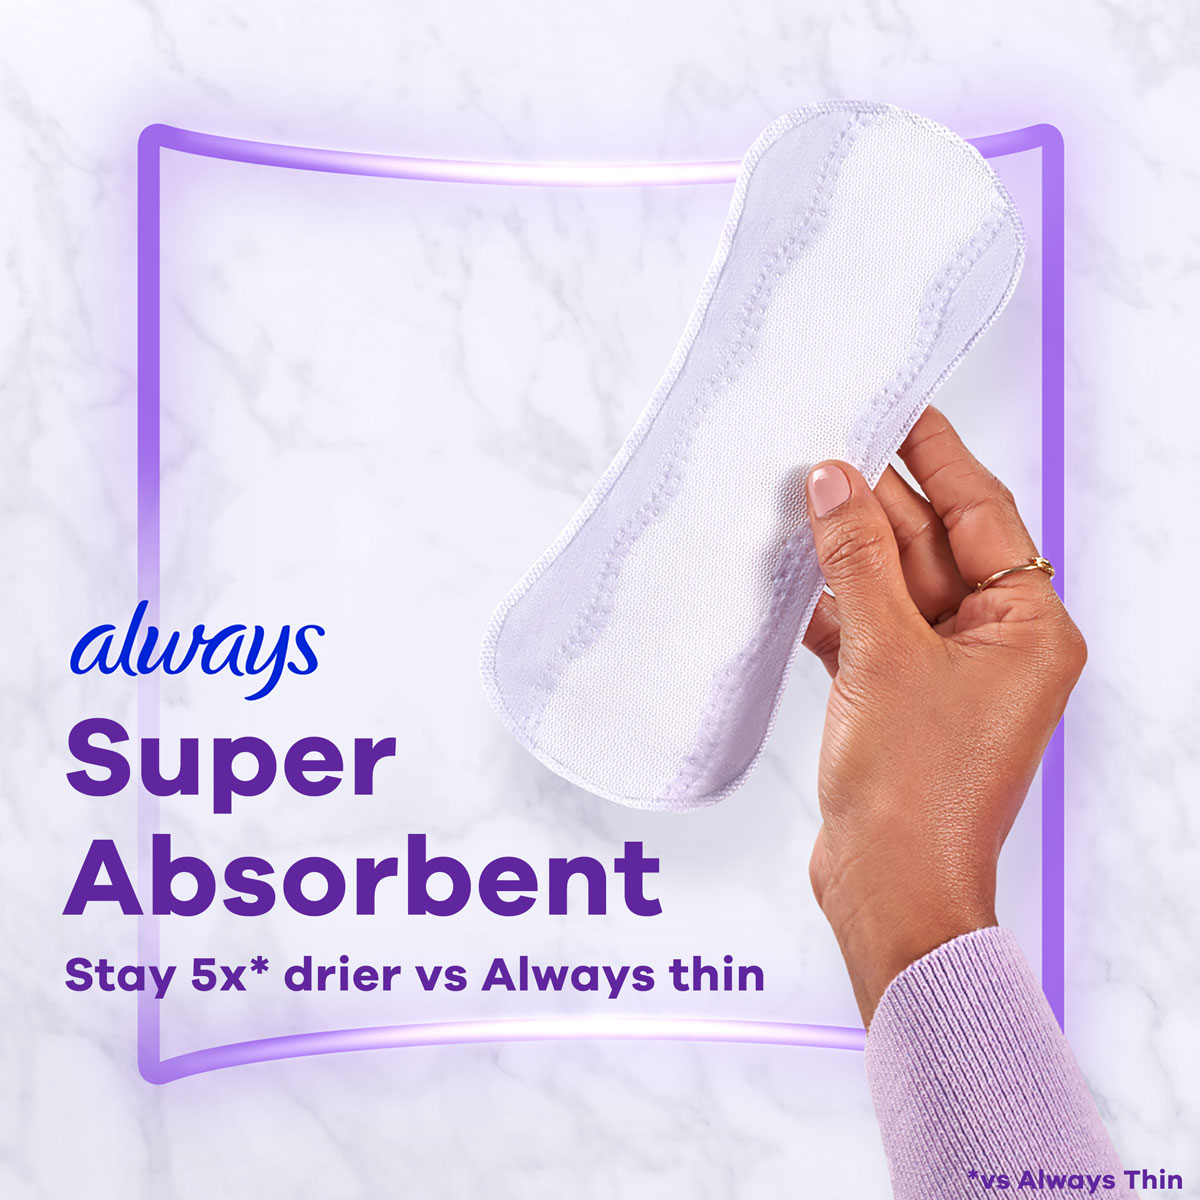 Super Absorbent Xtra Protection